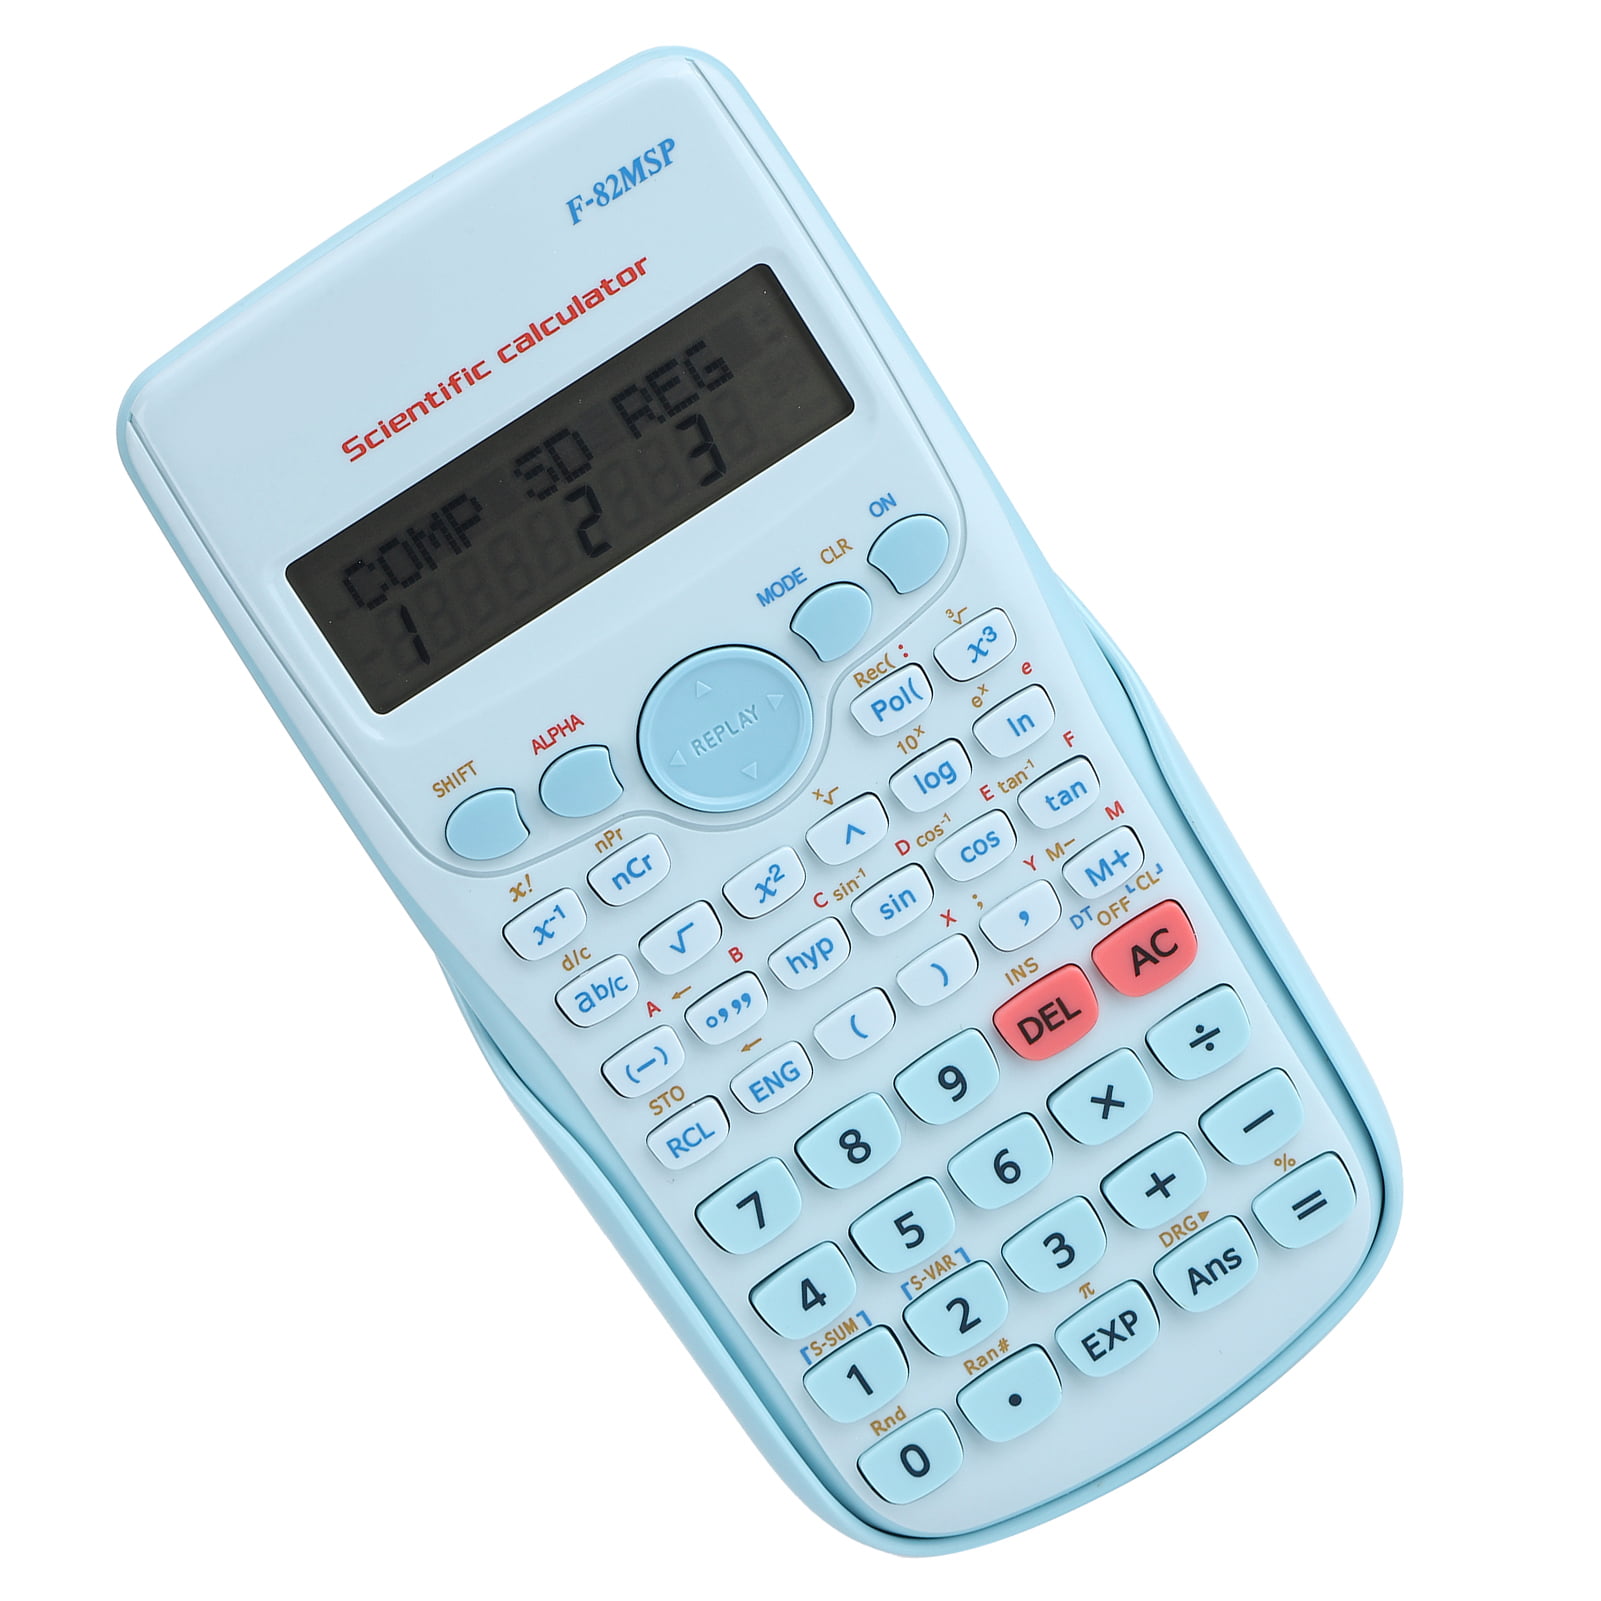 Student Multifunctional Scientific Calculator With Advance Exam Math Functions